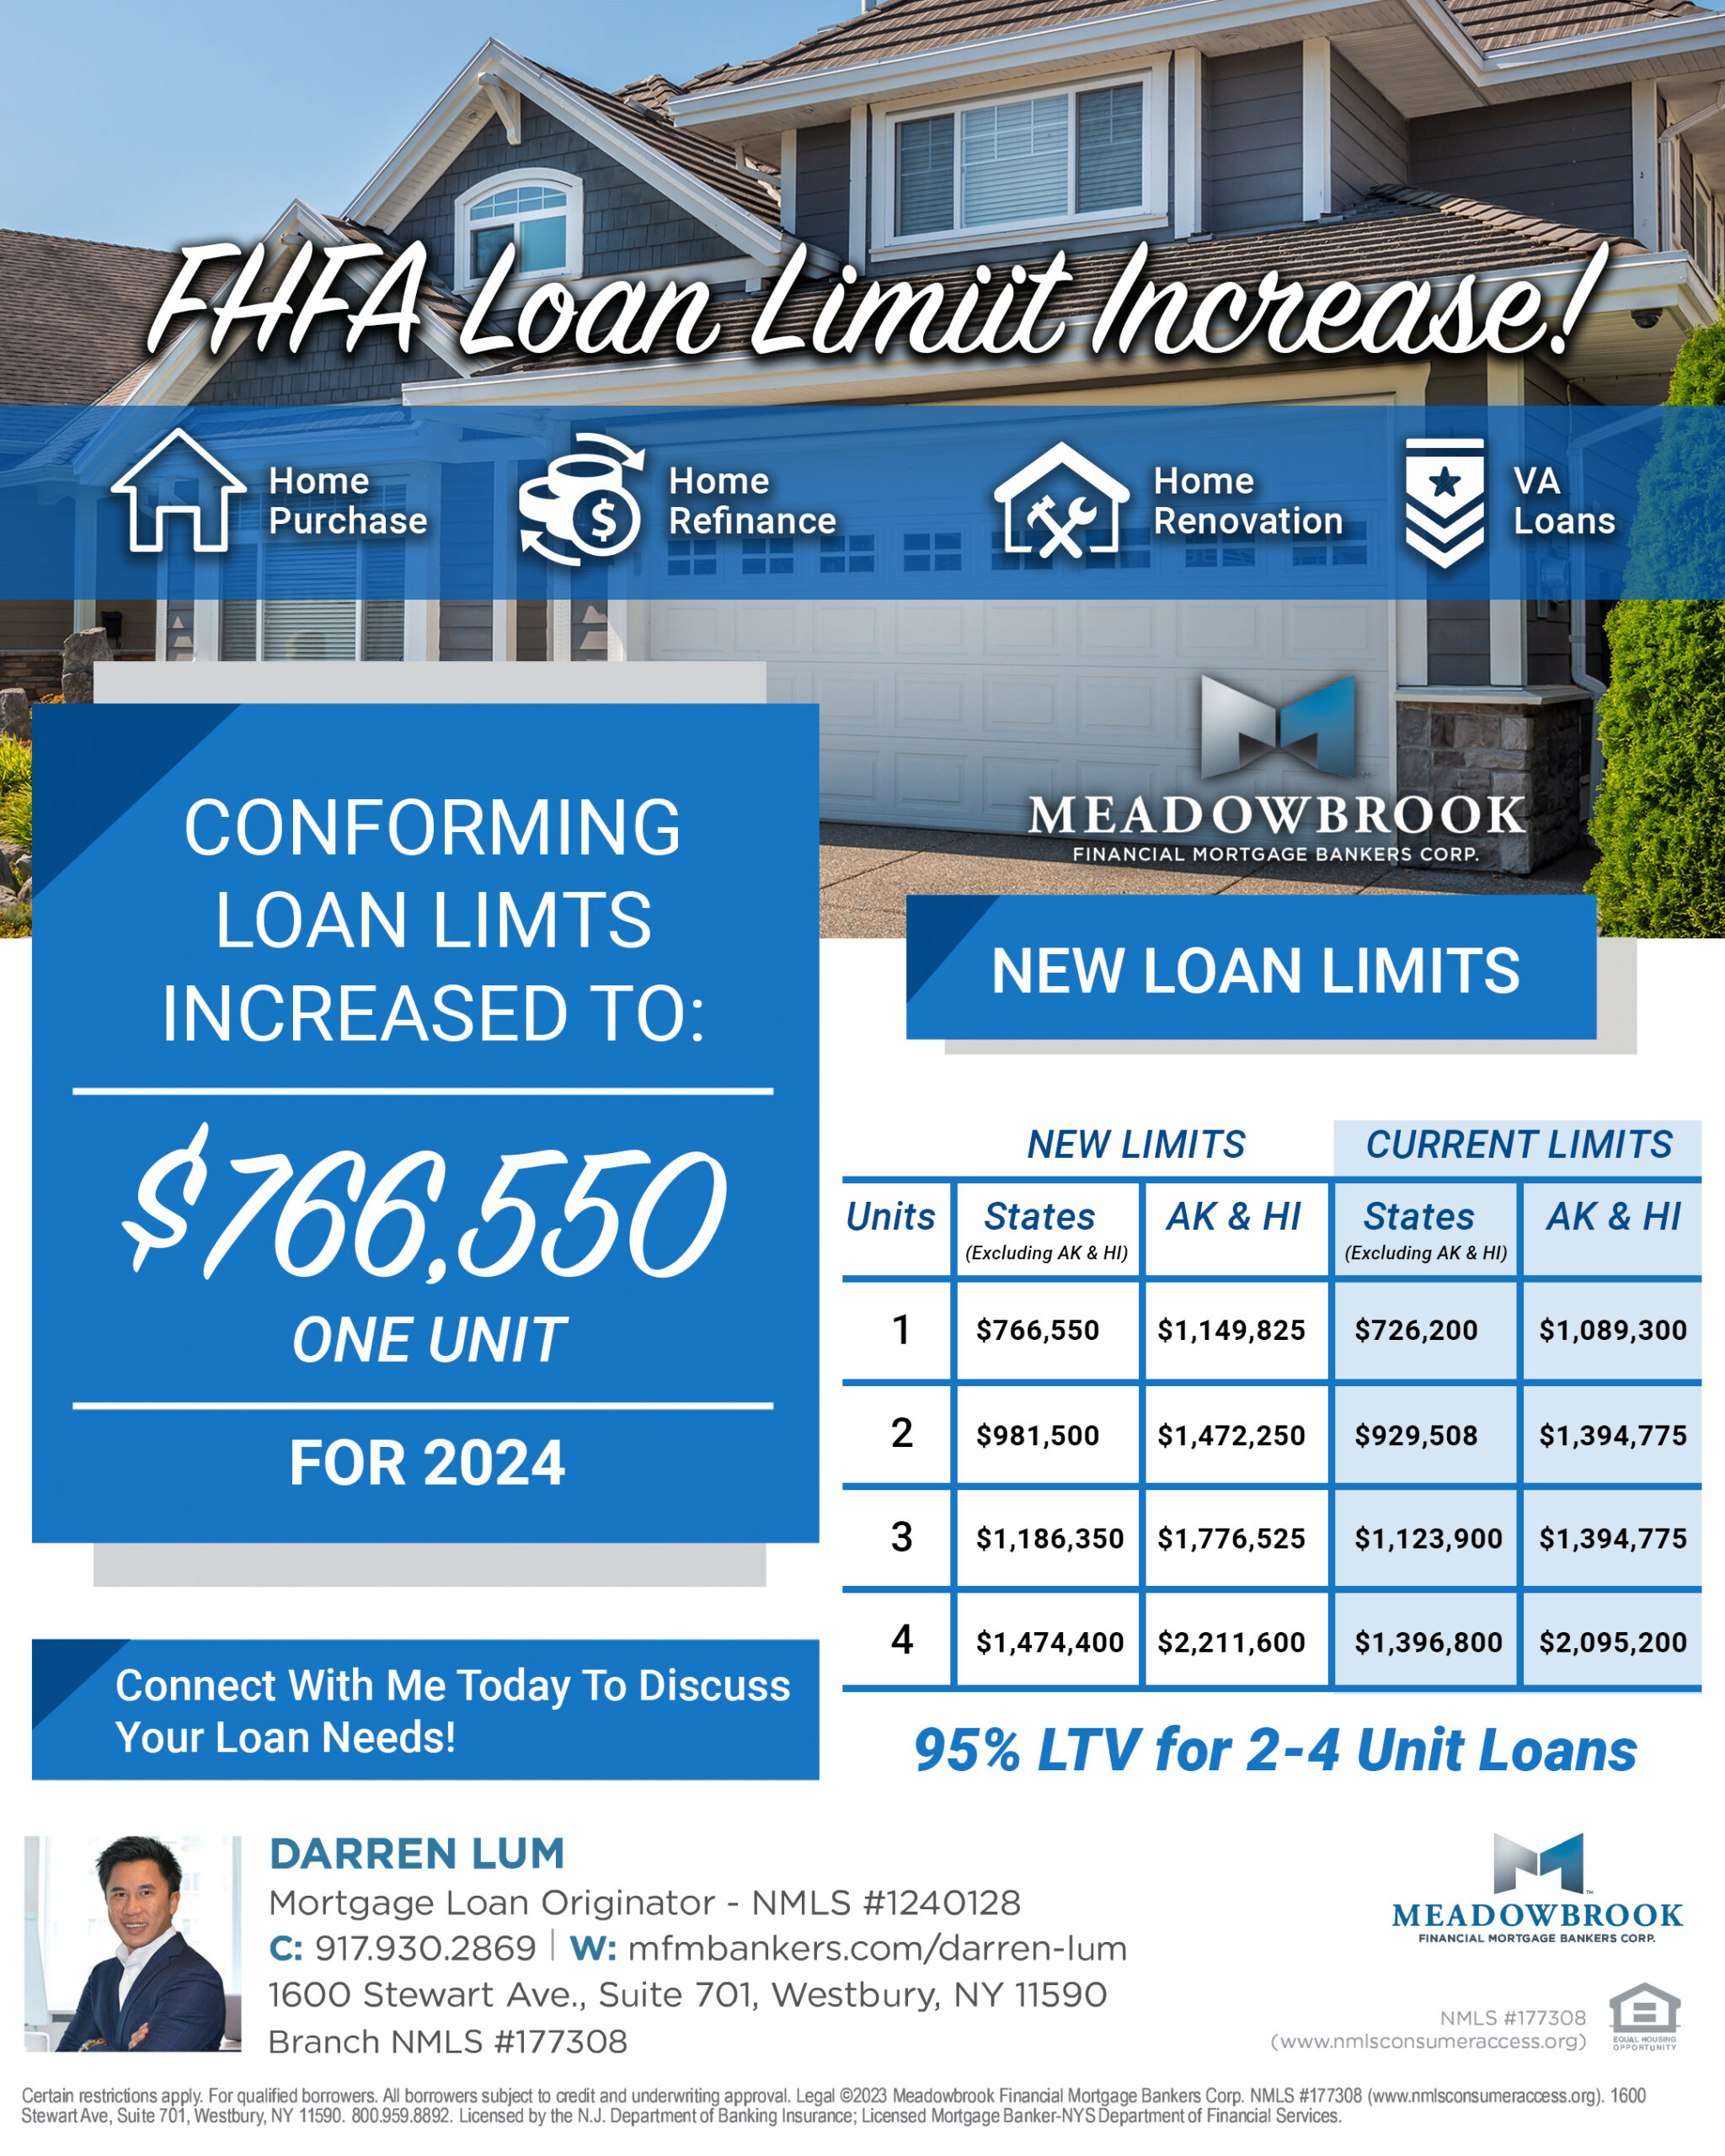 FHFA Unveils Expanded Loan Limits for the Year 2024! — Darren Lum